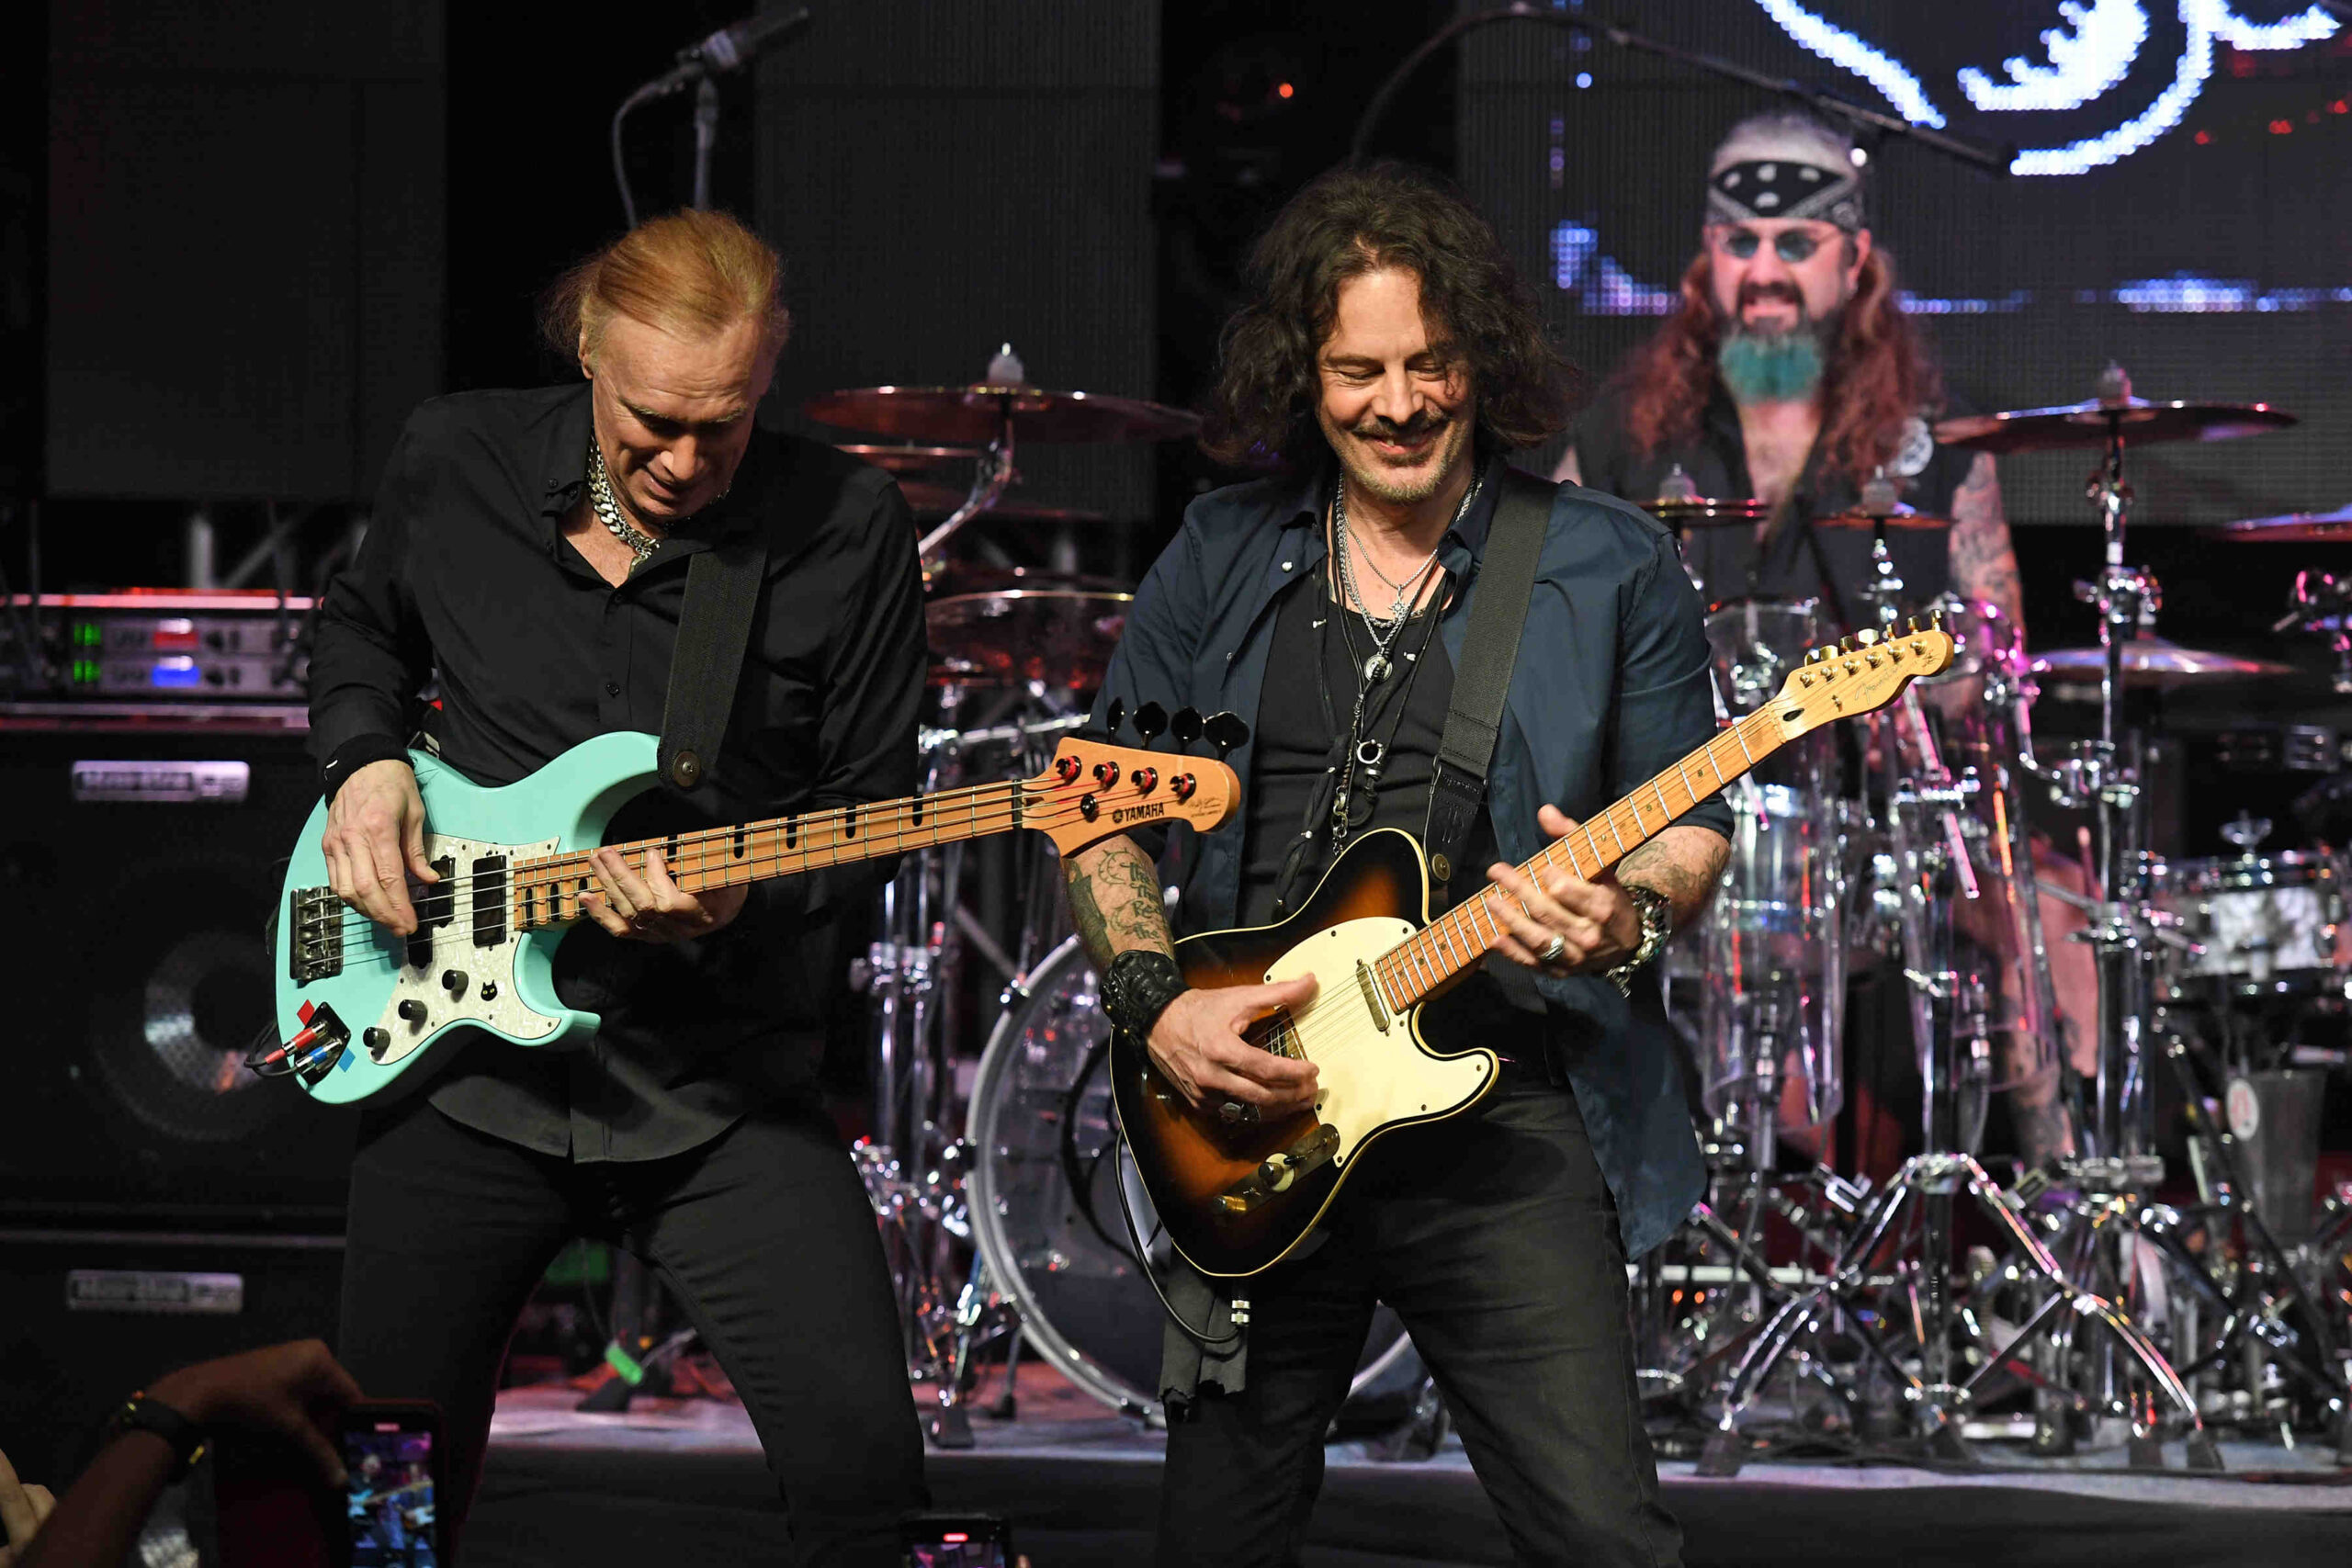 Concert Review The Winery Dogs Ft. Lauderdale, FL March 25th, 2023